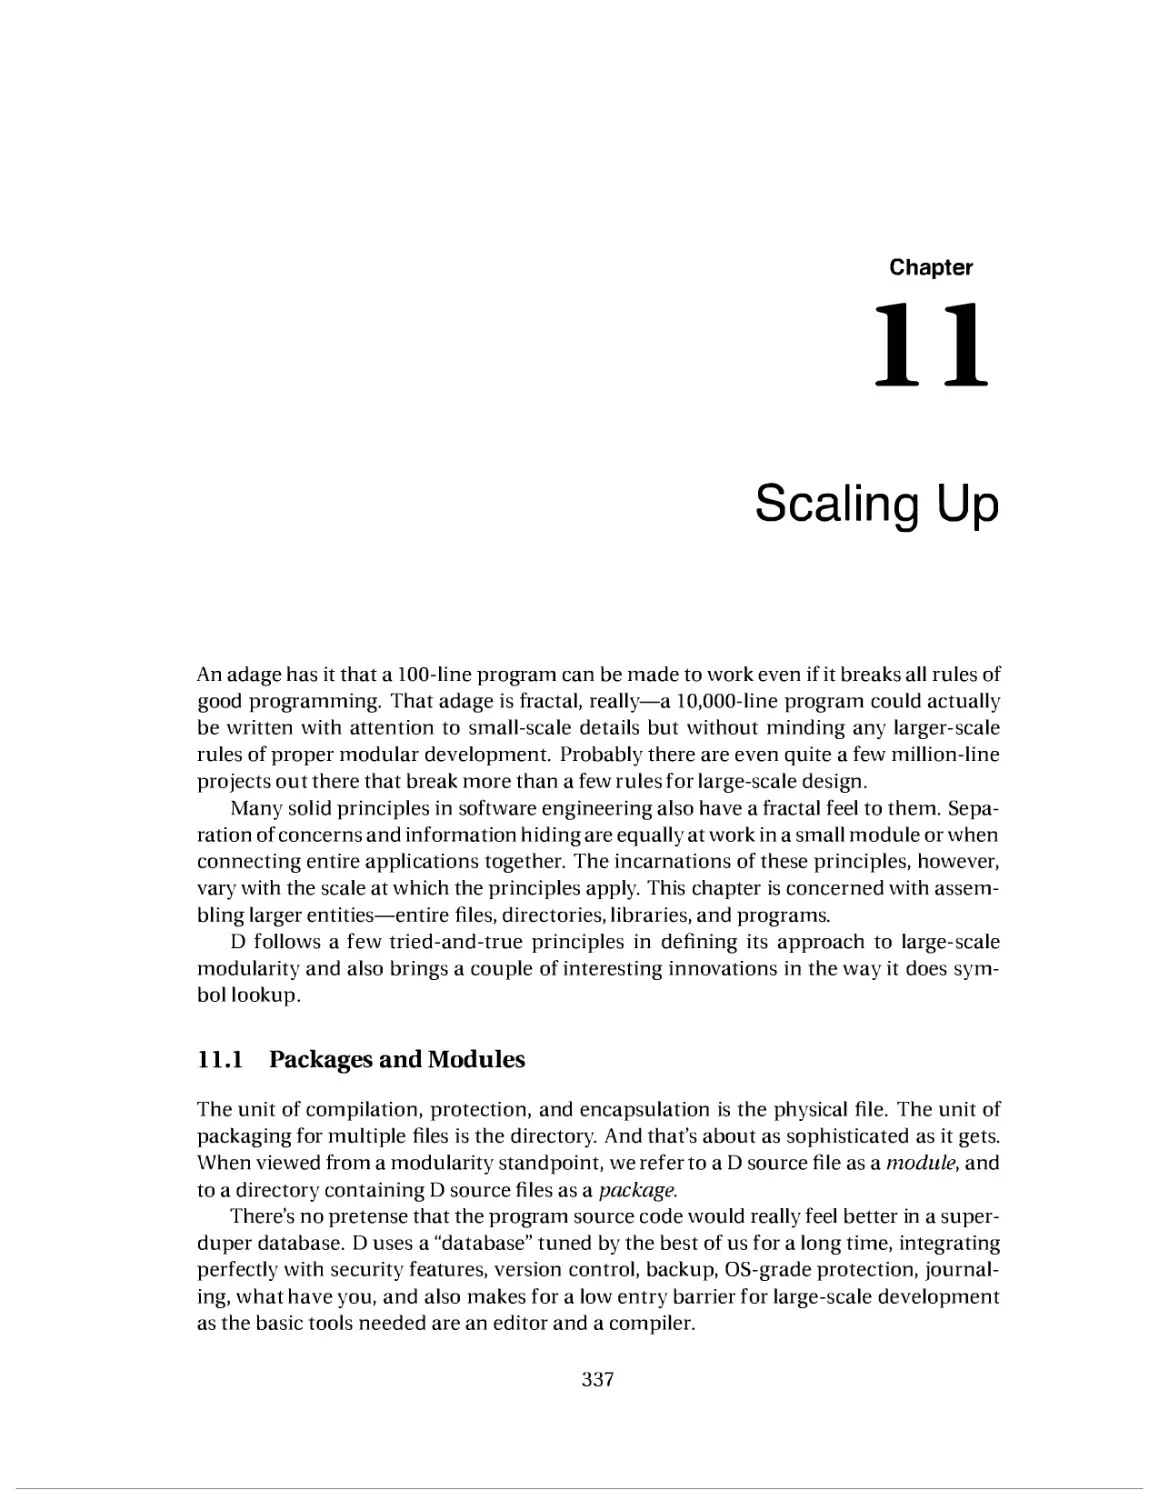 11. Scaling Up